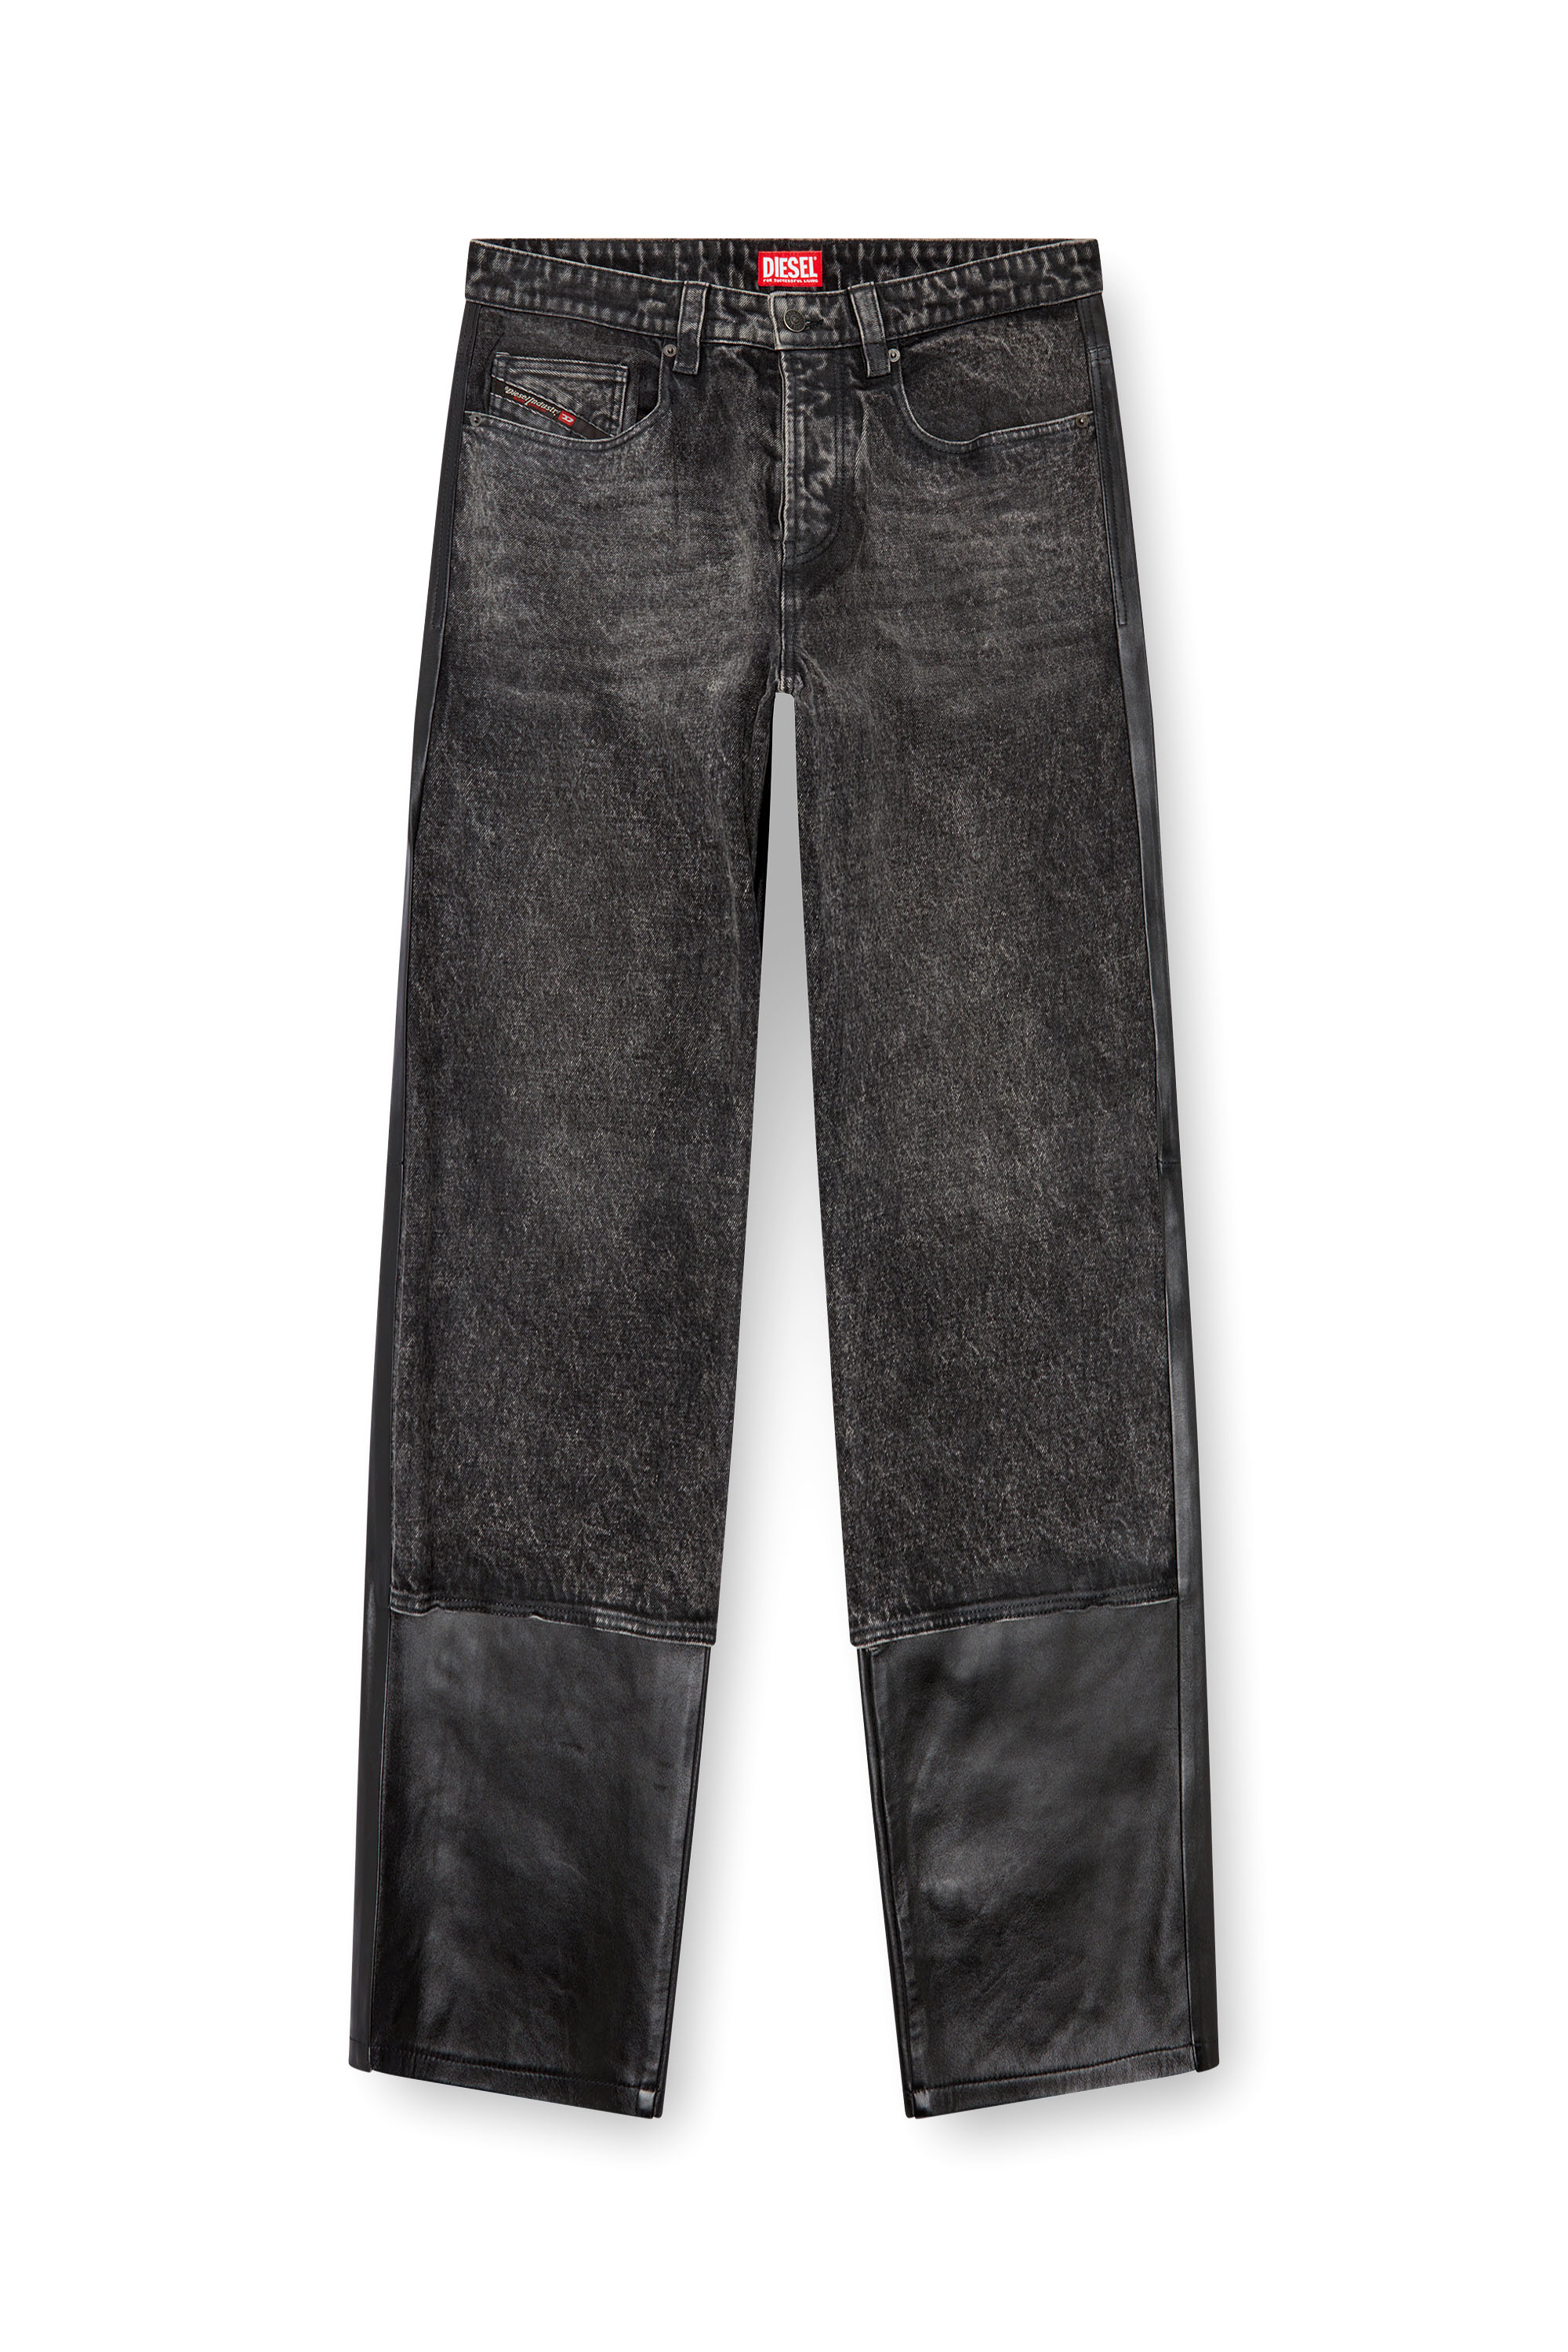 Diesel - P-BRETCH, Male Leather and denim pants in ブラック - Image 3